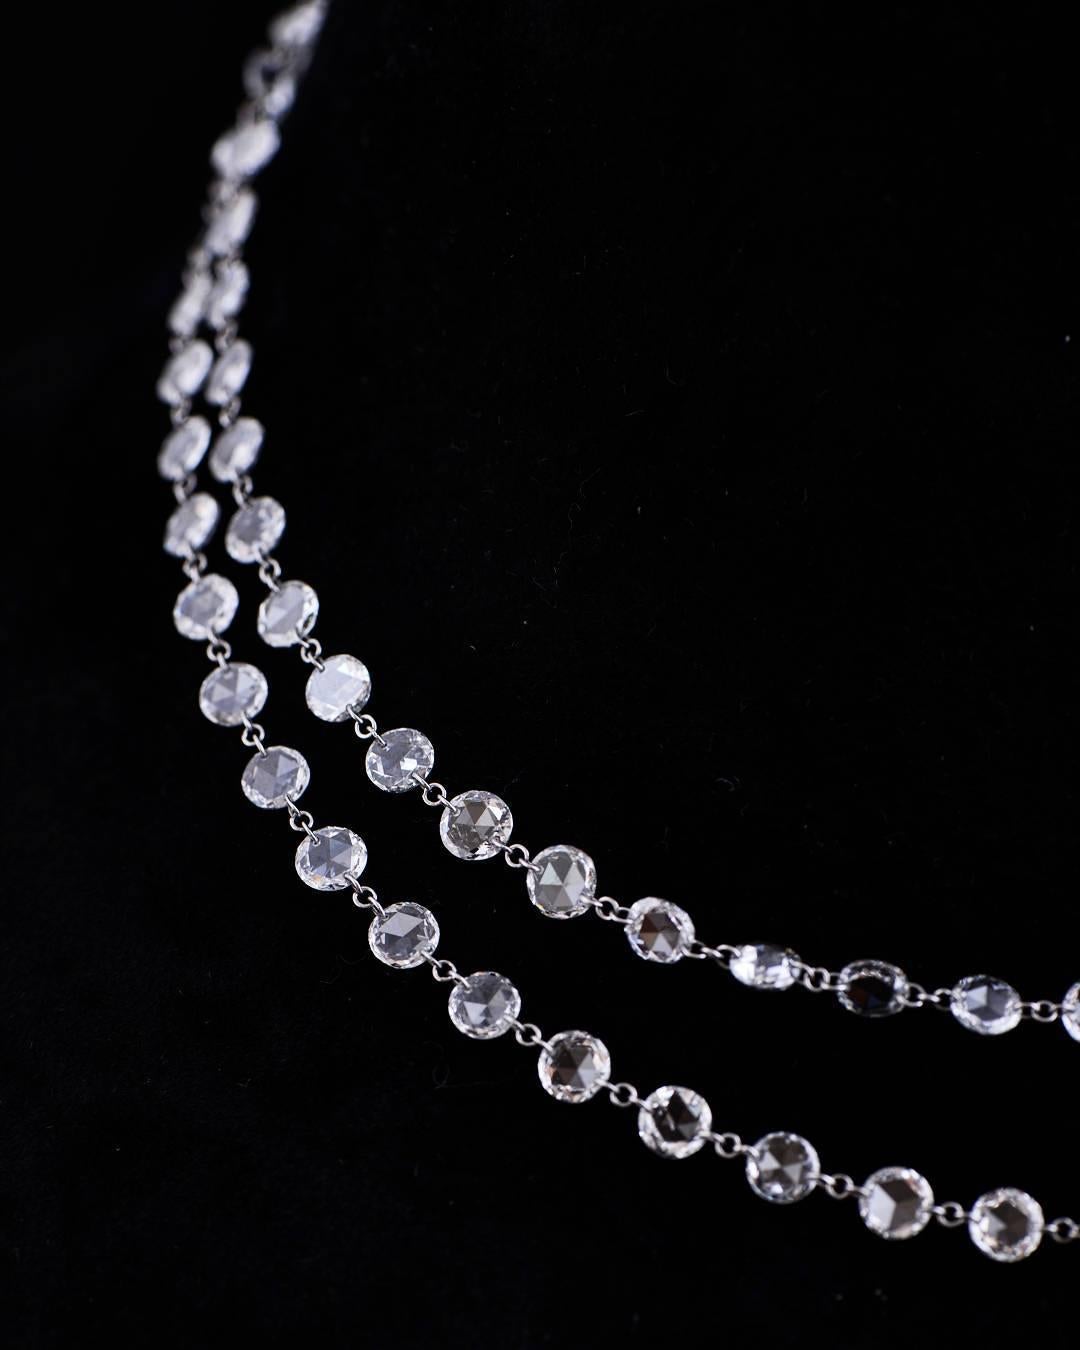 PANIM 11.45 Carats Diamond Rosecut 18K White Gold Choker Necklace

A gorgeous diamond necklace is a staple in everyone's wardrobe .This Panim Classic Diamond Rosecut Necklace features round shape diamond rosecut .These diamonds sparkle incredibly